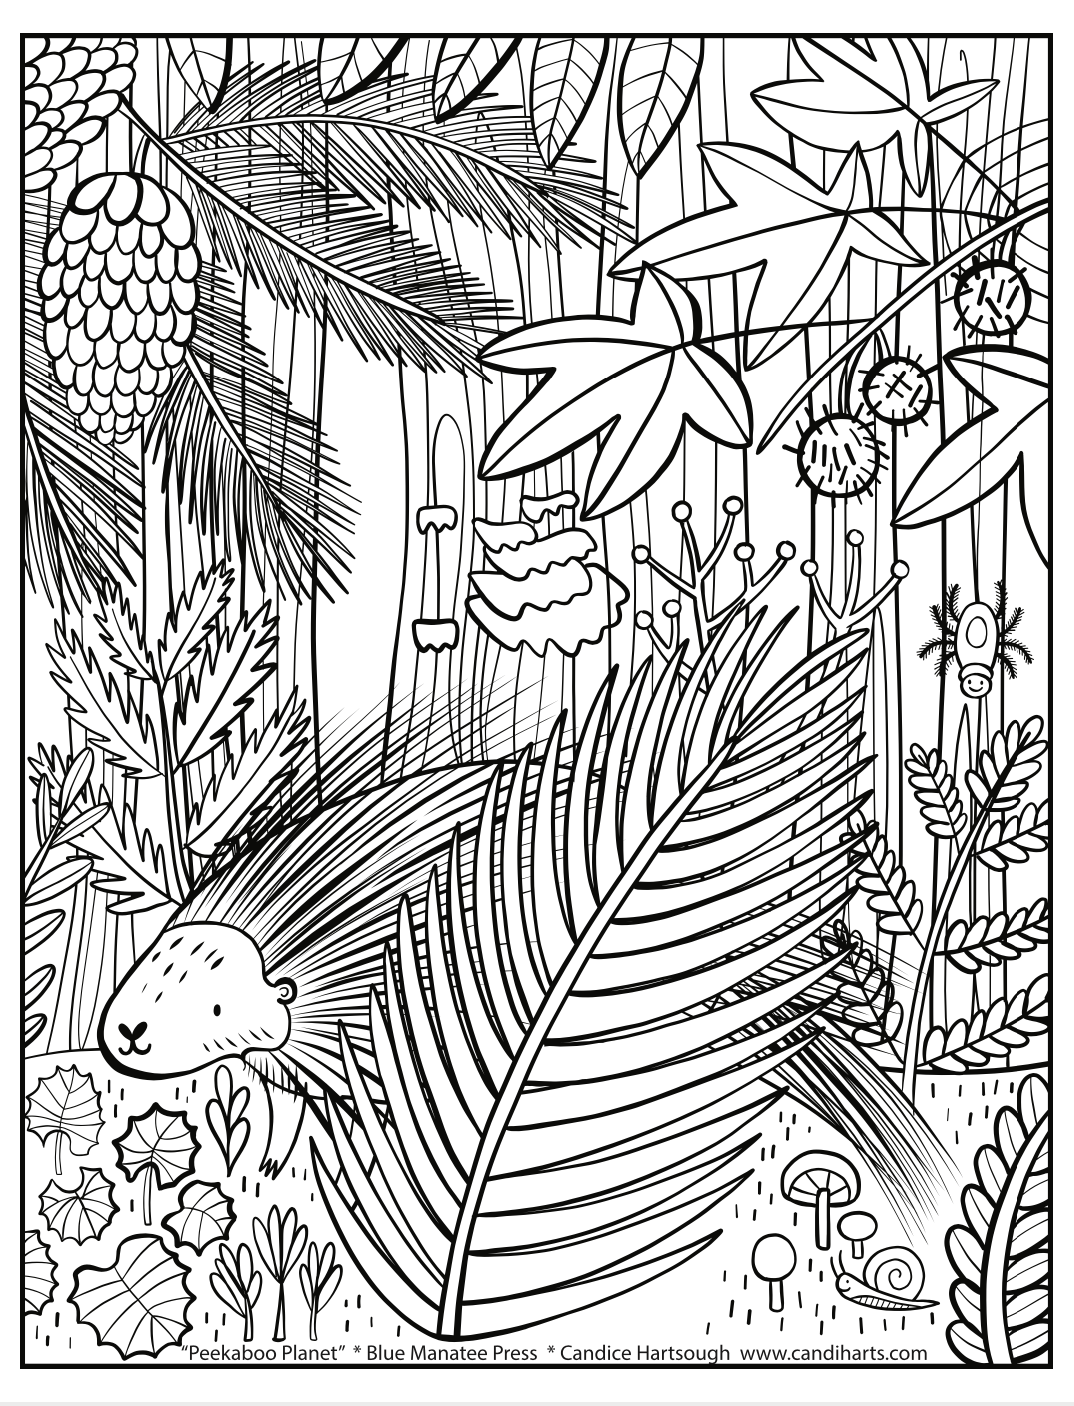 Coloring pages â blue manatee press